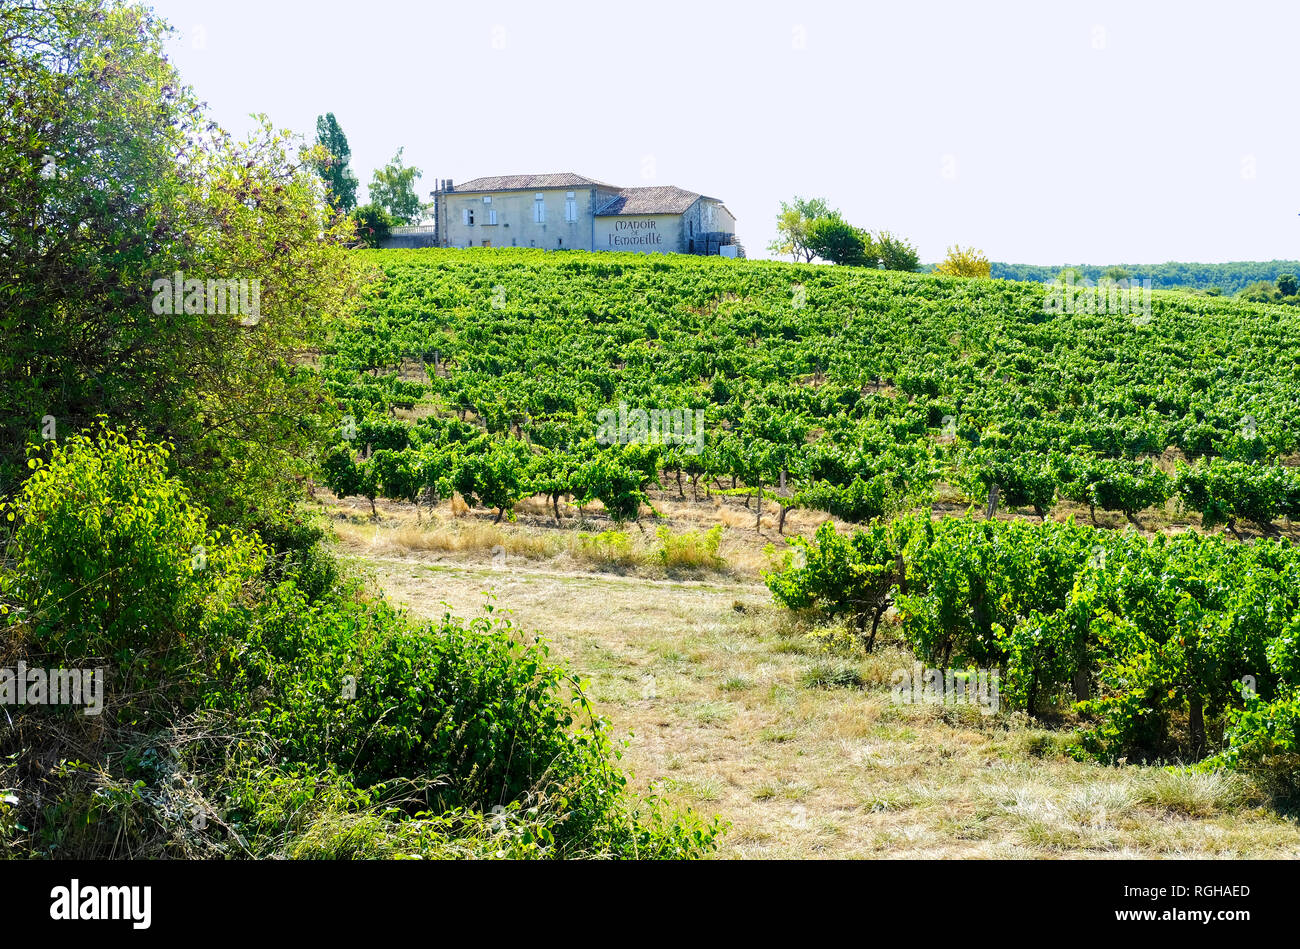 Campagnac, France - August 12, 2018: Winemaking in France. Manor of L'emmeille surrounded with vineyard. Campagnac, France. Stock Photo